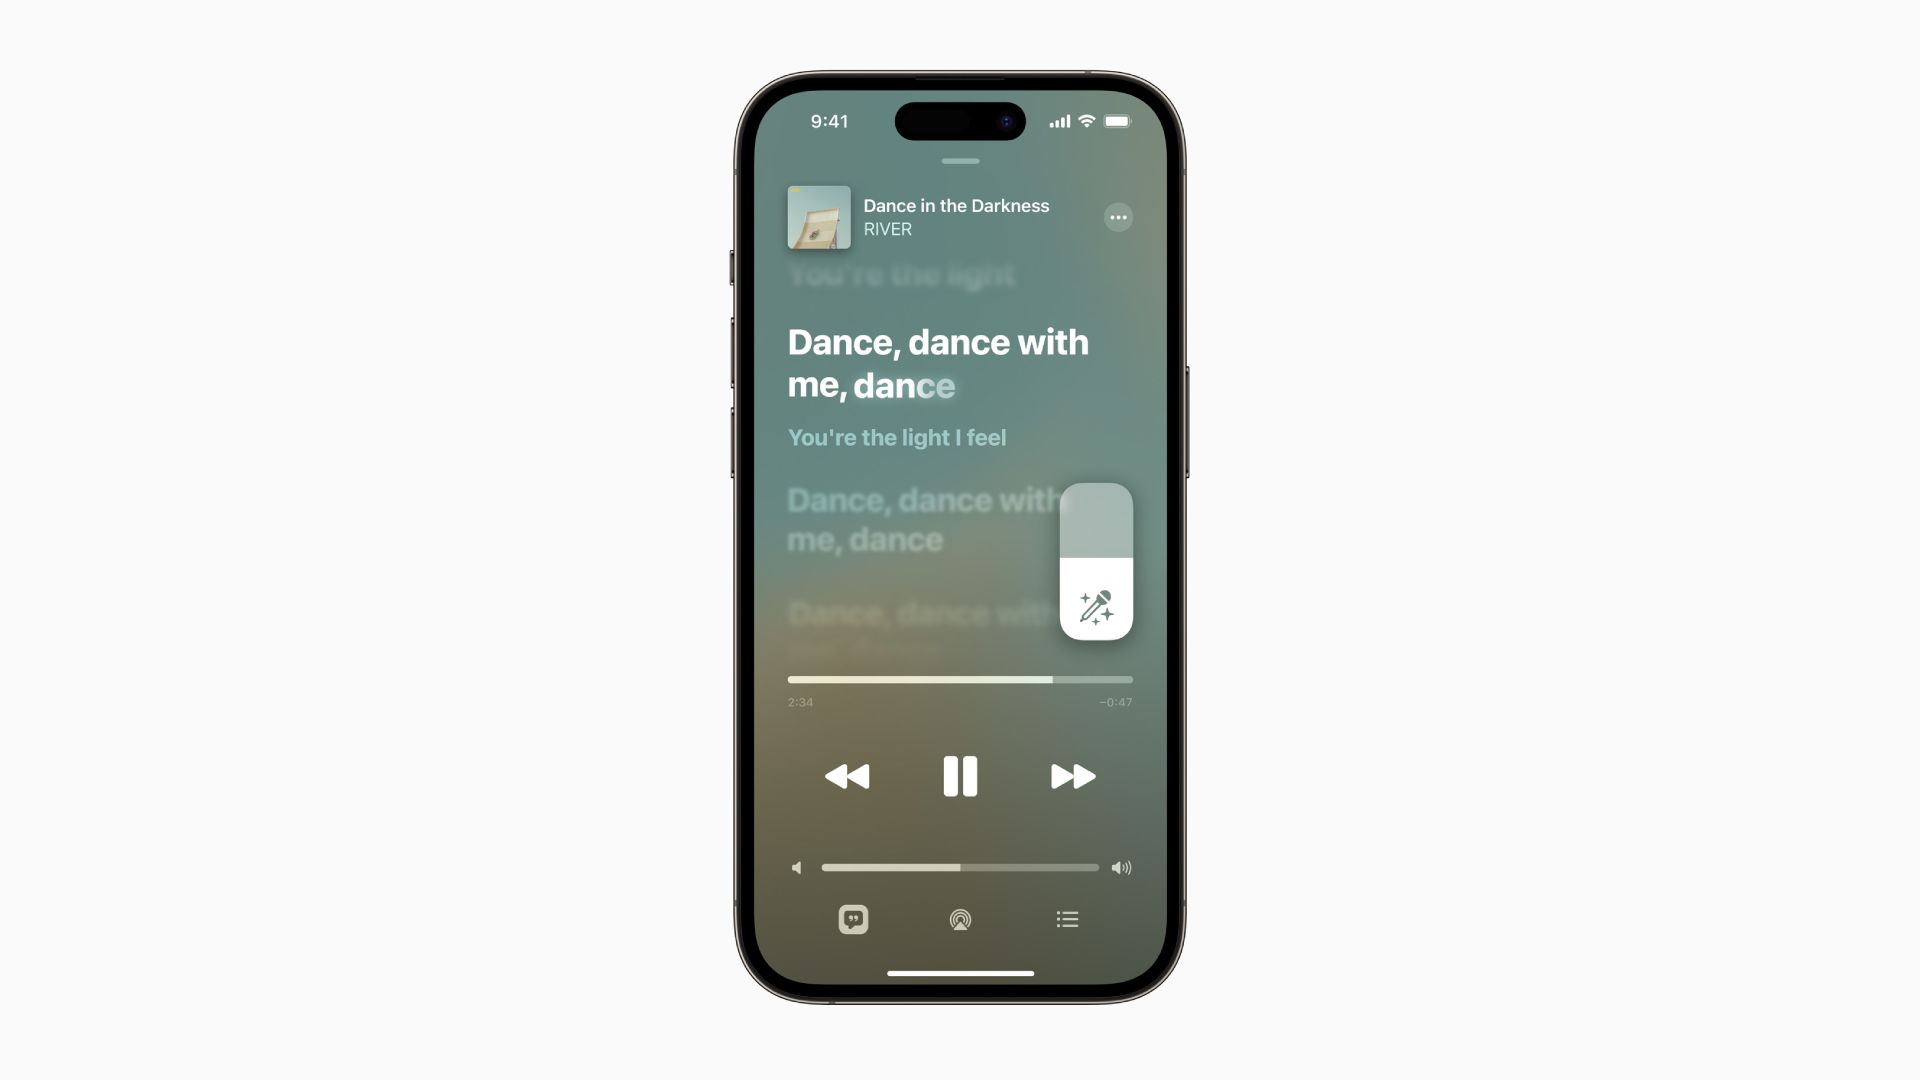 How will Apple Music Sing appear on iPhone, the user can follow the lyrics and change the volume while singing.